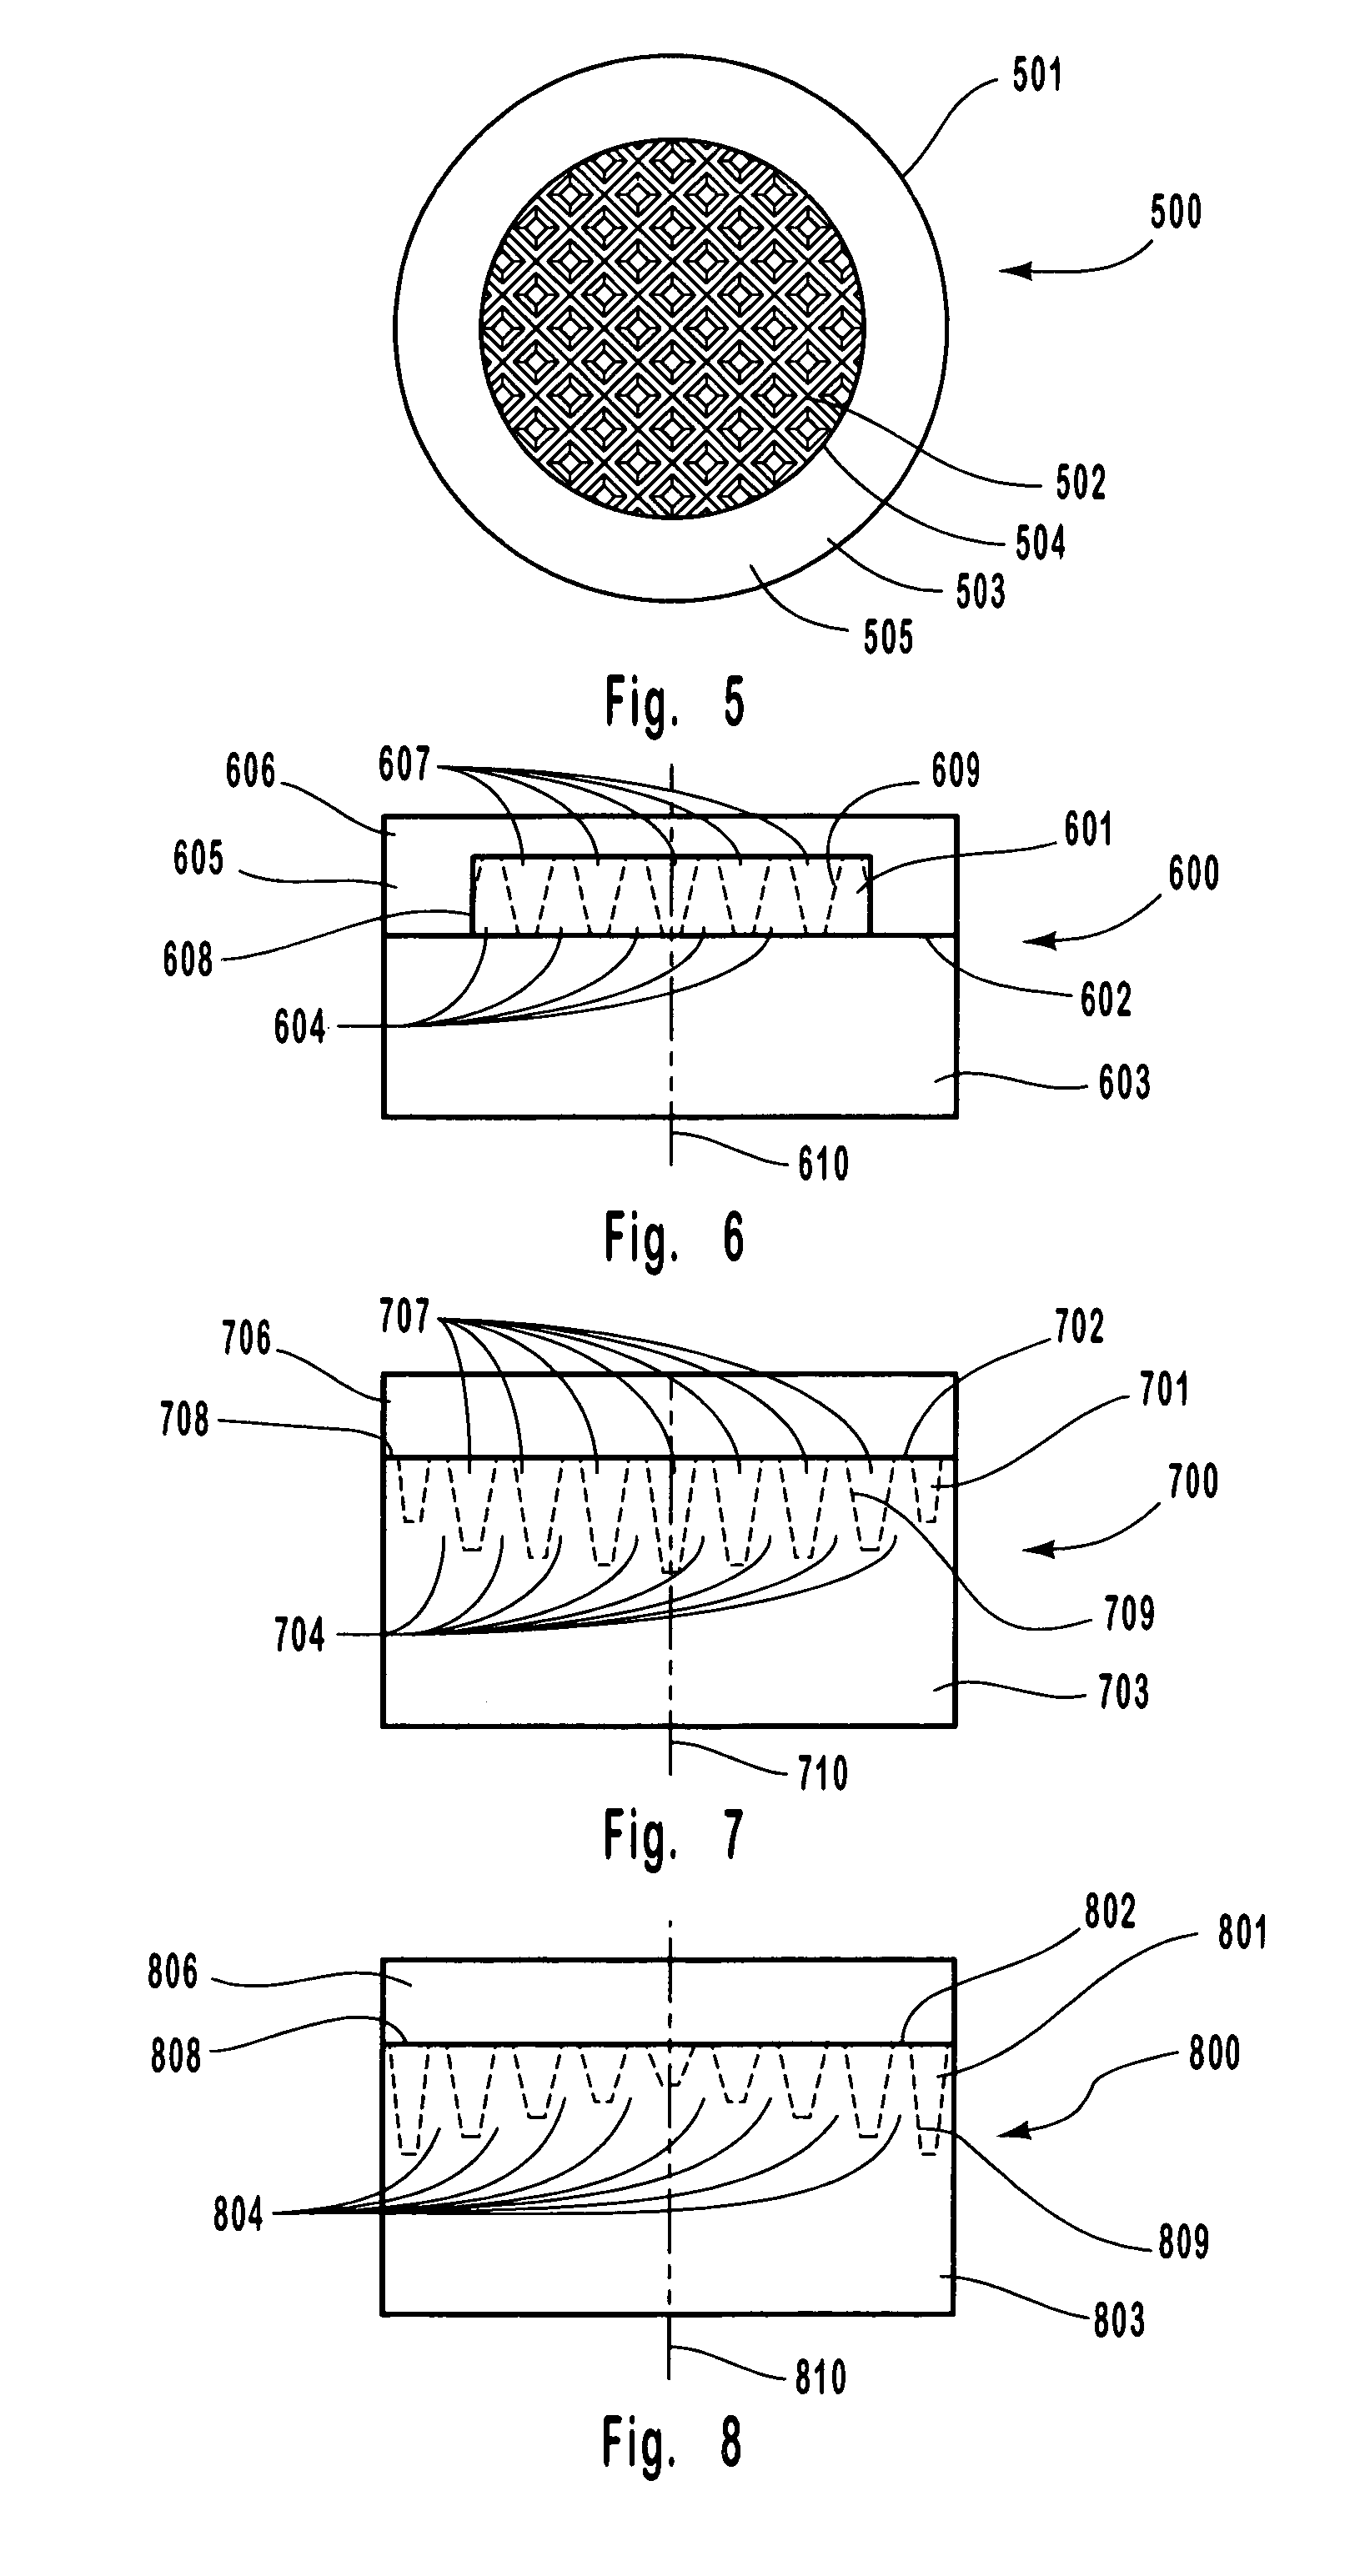 PDC interface incorporating a closed network of features